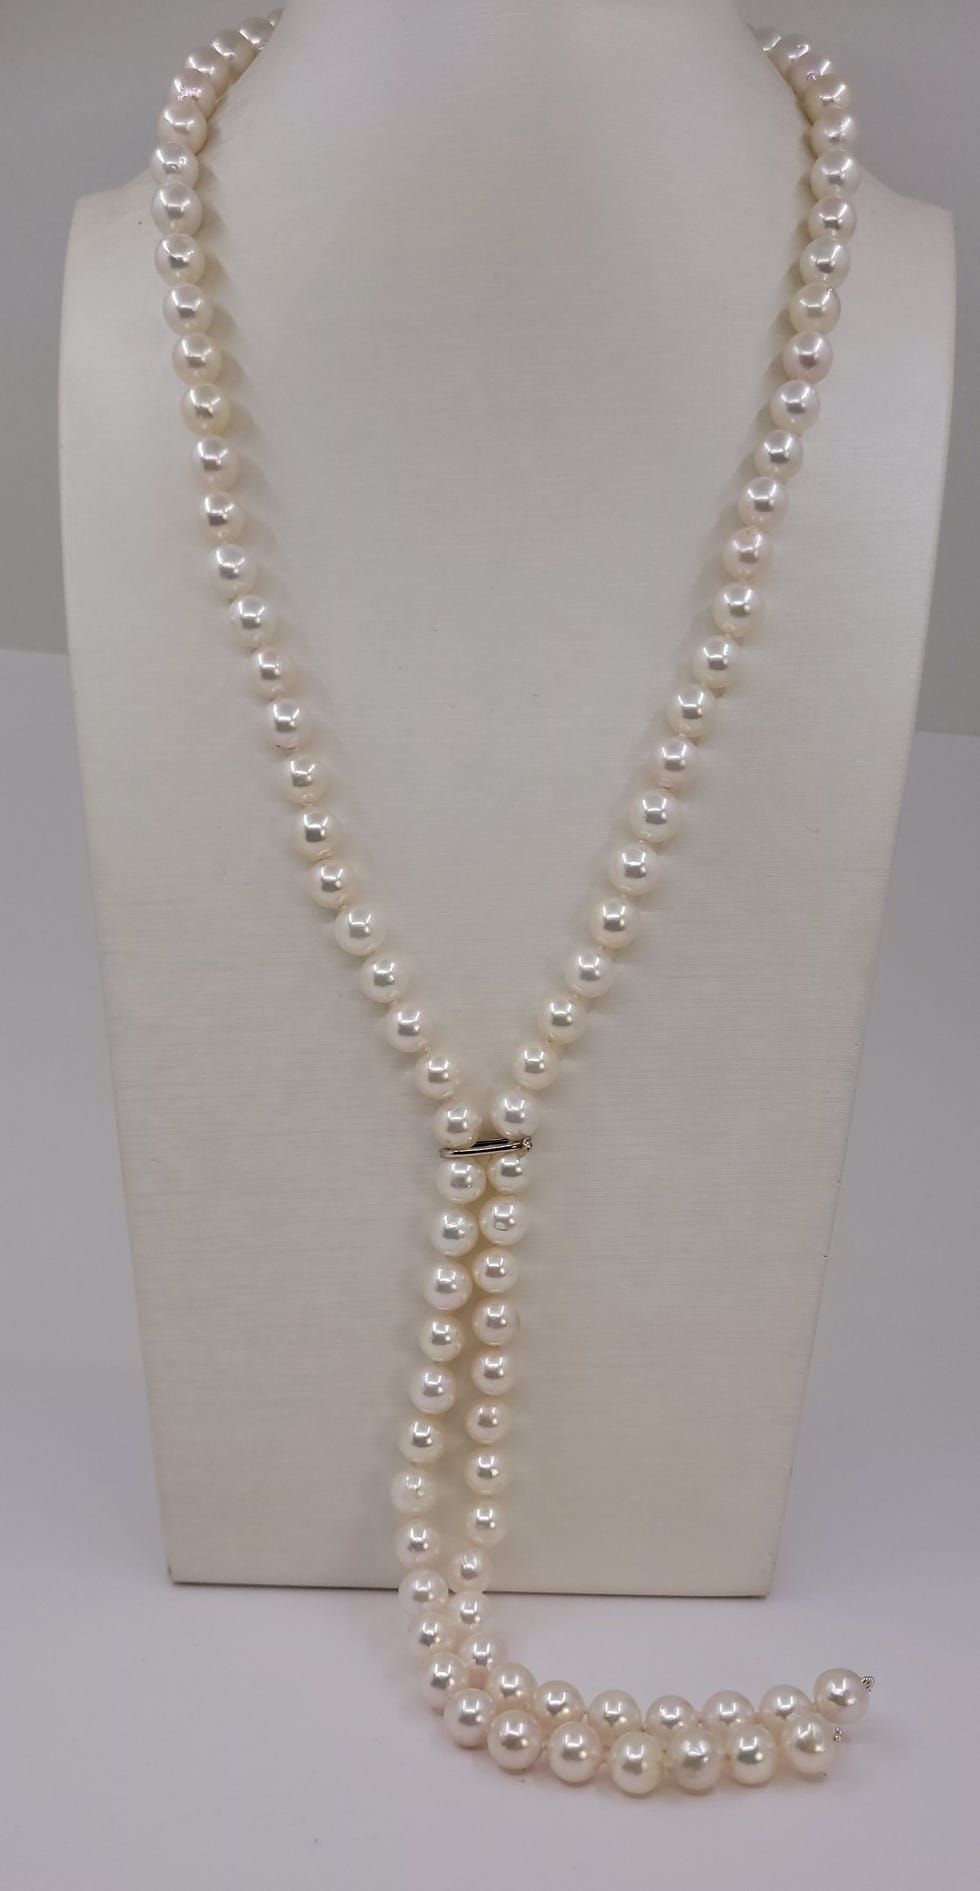 a necklace with pearls